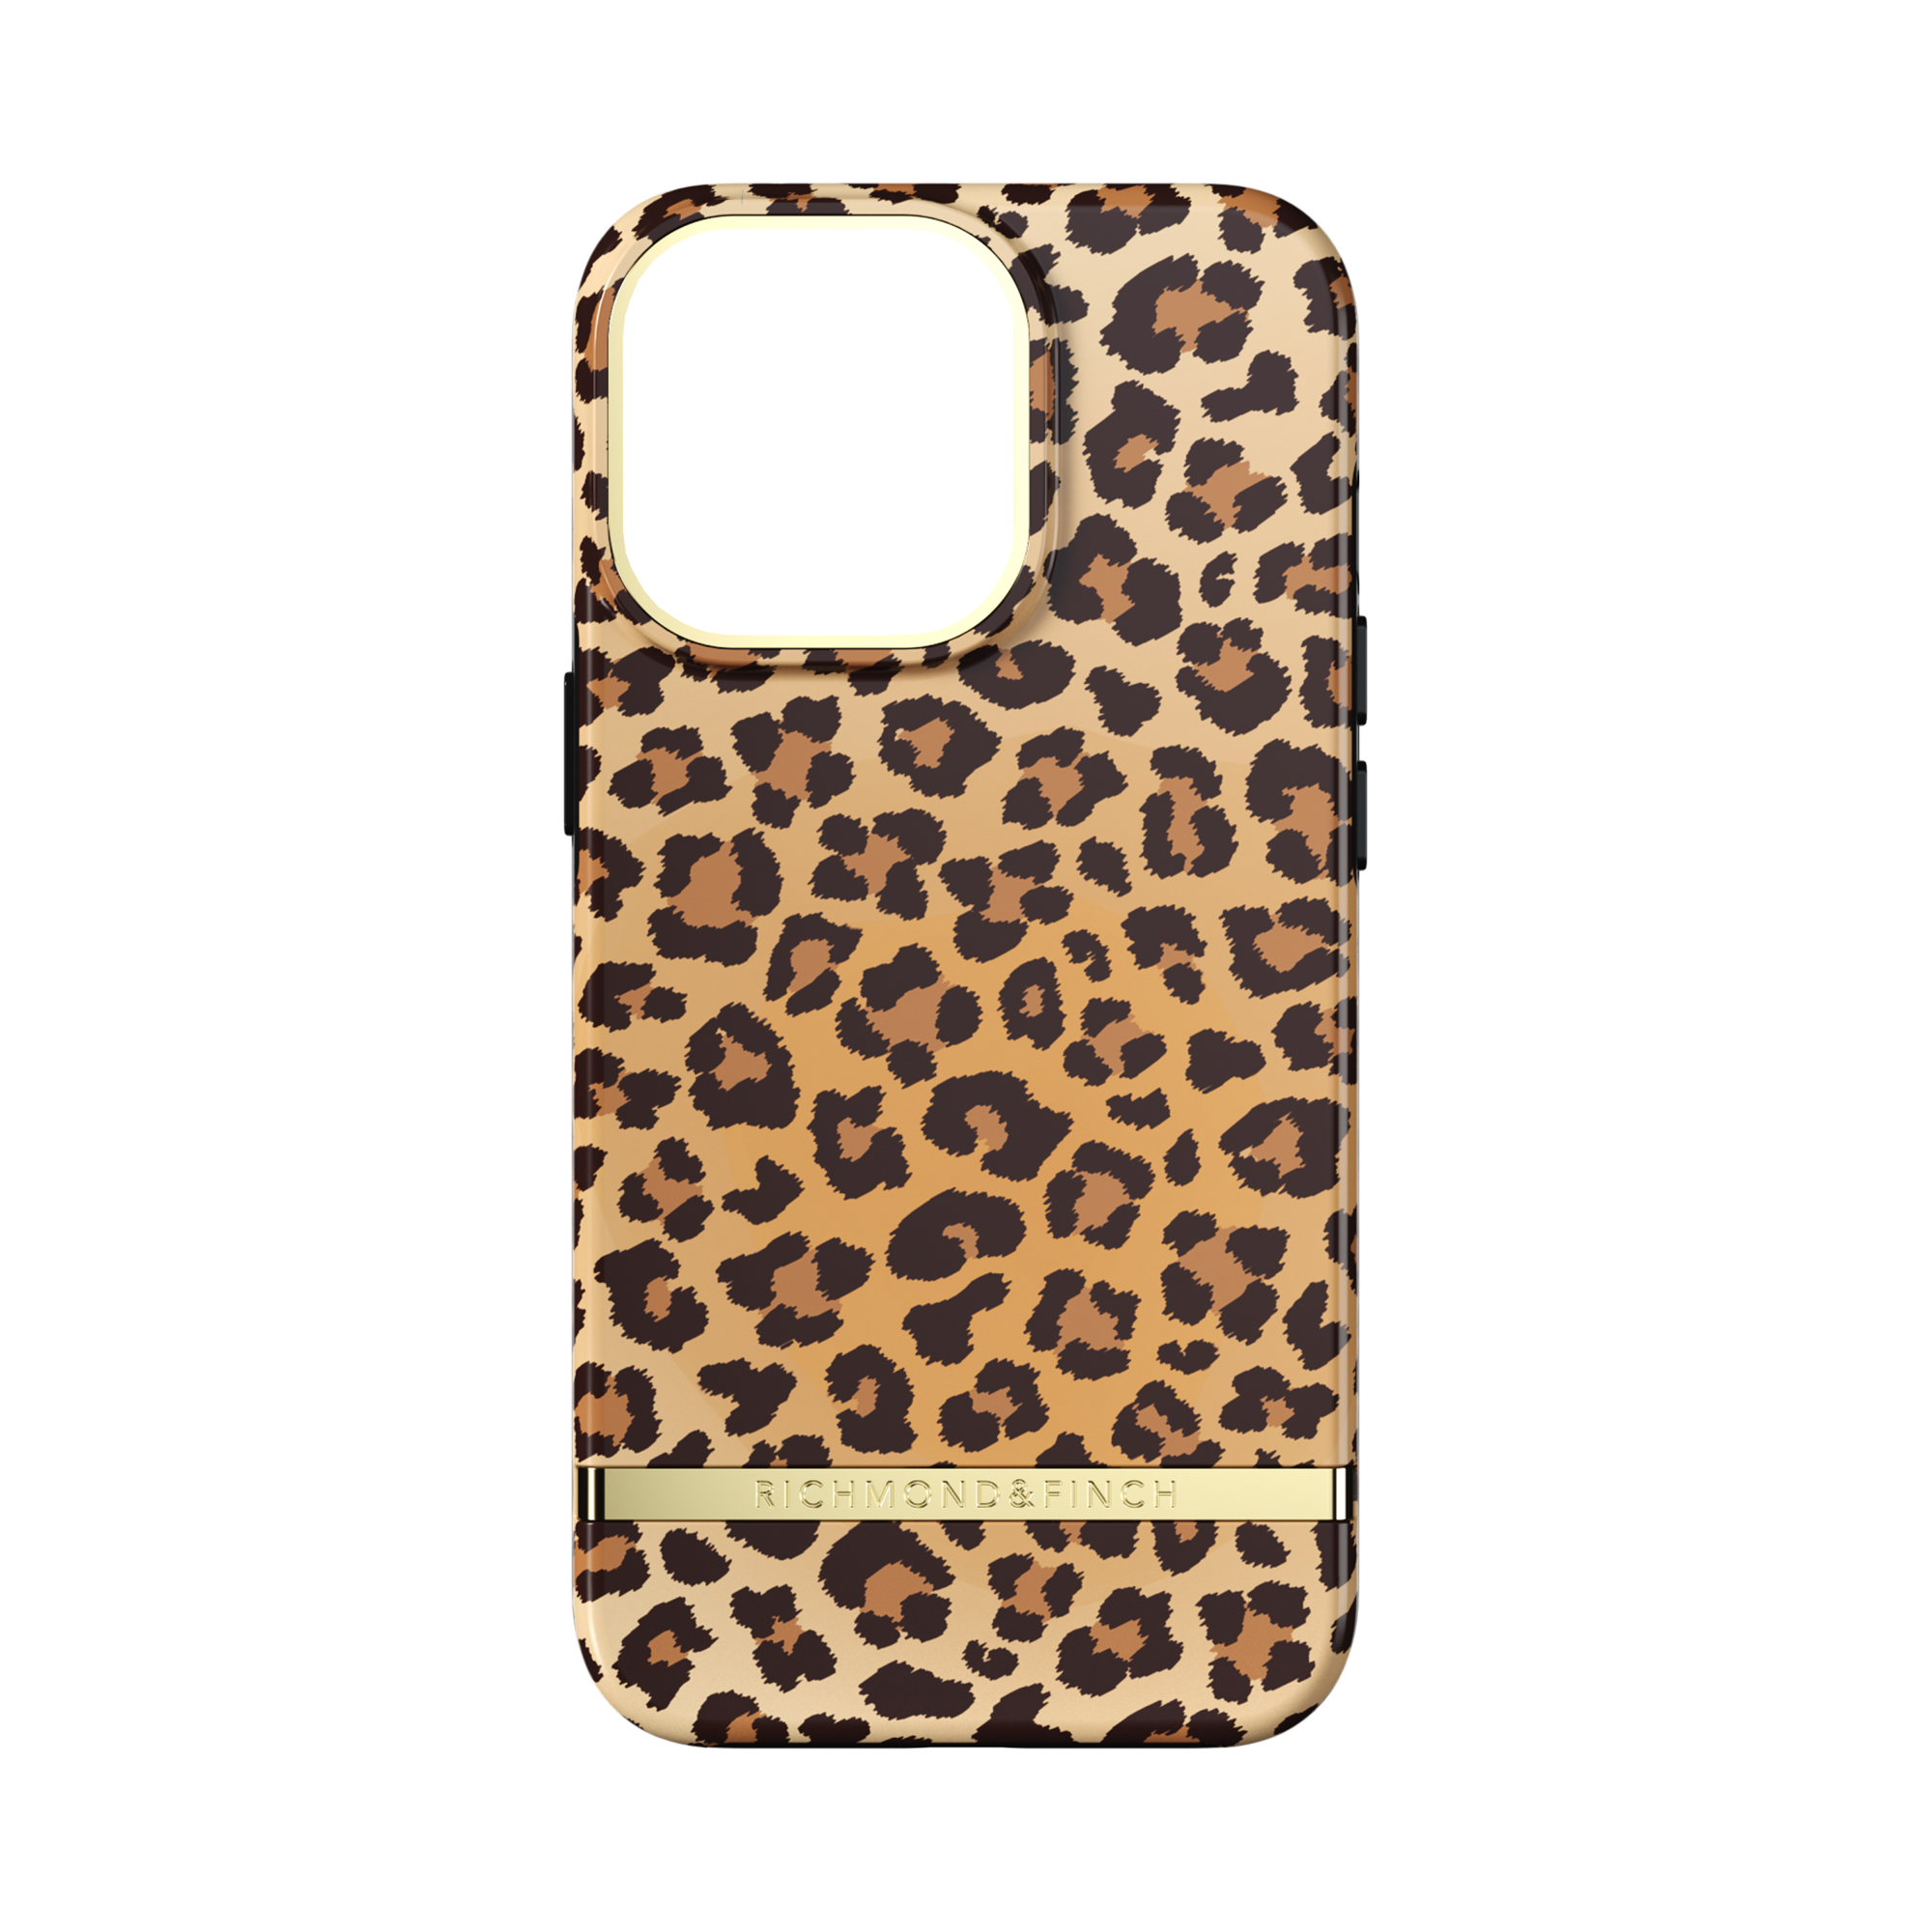 & Soft IPHONE APPLE, RICHMOND iPhone 13 13 PRO, Pro, FINCH YELLOW Leopard Backcover,